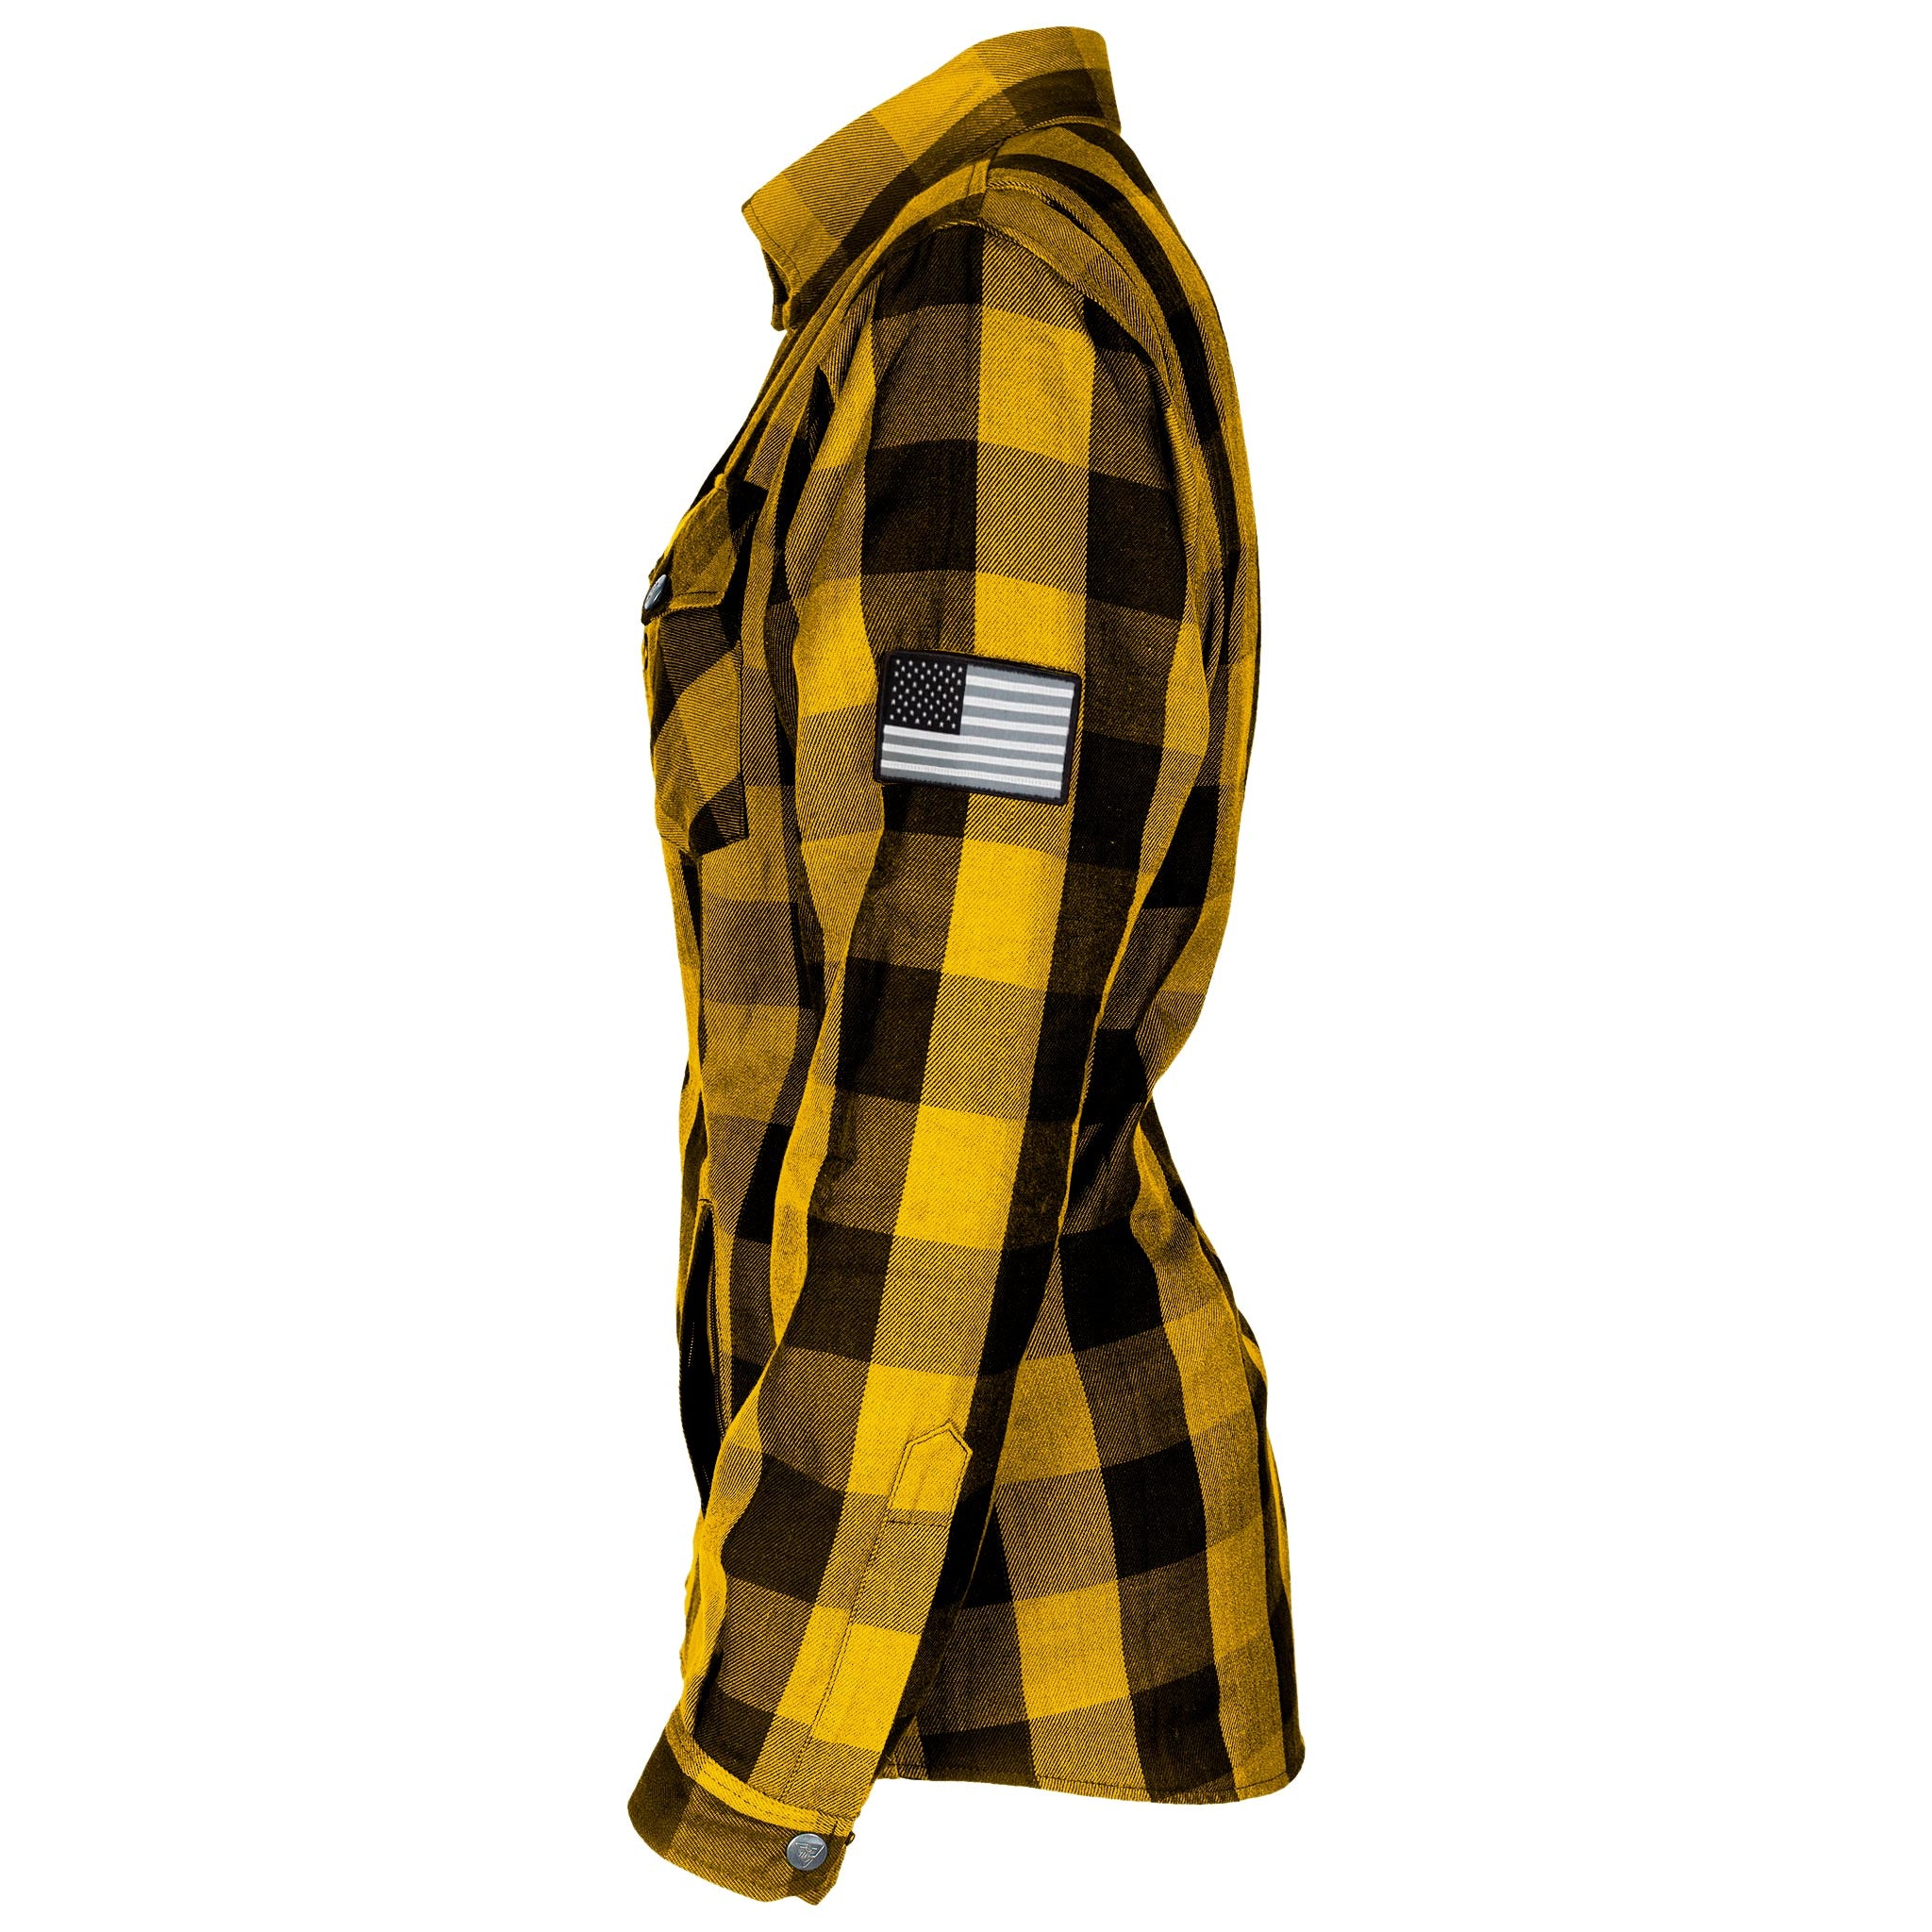 Protective Flannel Shirt for Women - Yellow and Black Checkered with Pads